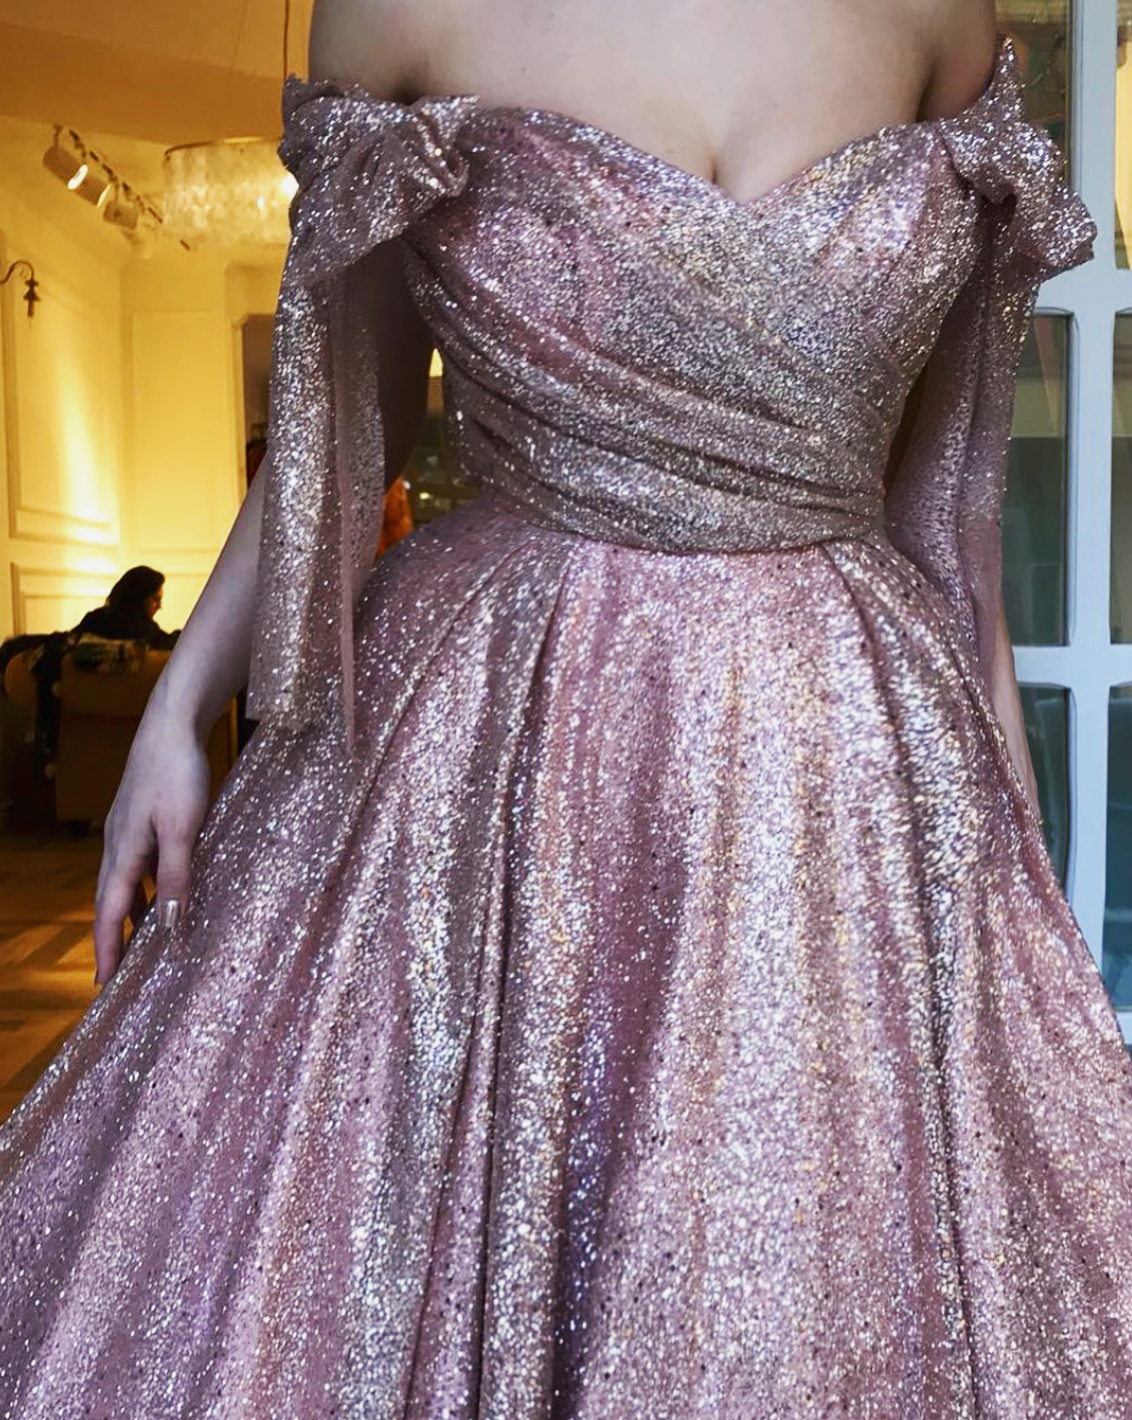 Pink A-Line dress with off the shoulder sleeves and sequins